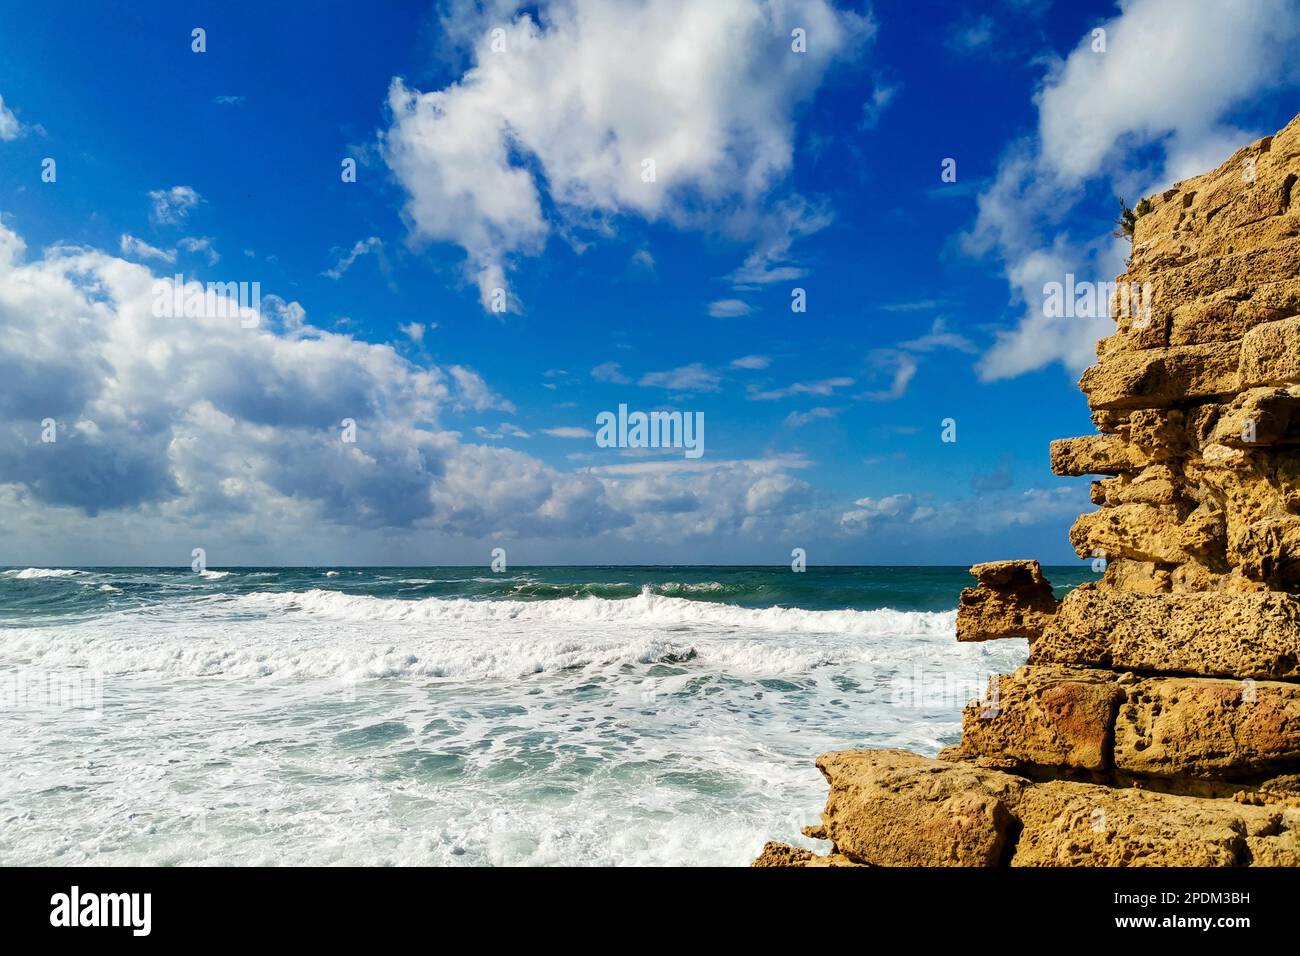 Ruins ancient city on Mediterranean coast. Colorful seascape in sunny weather at coast Stock Photo